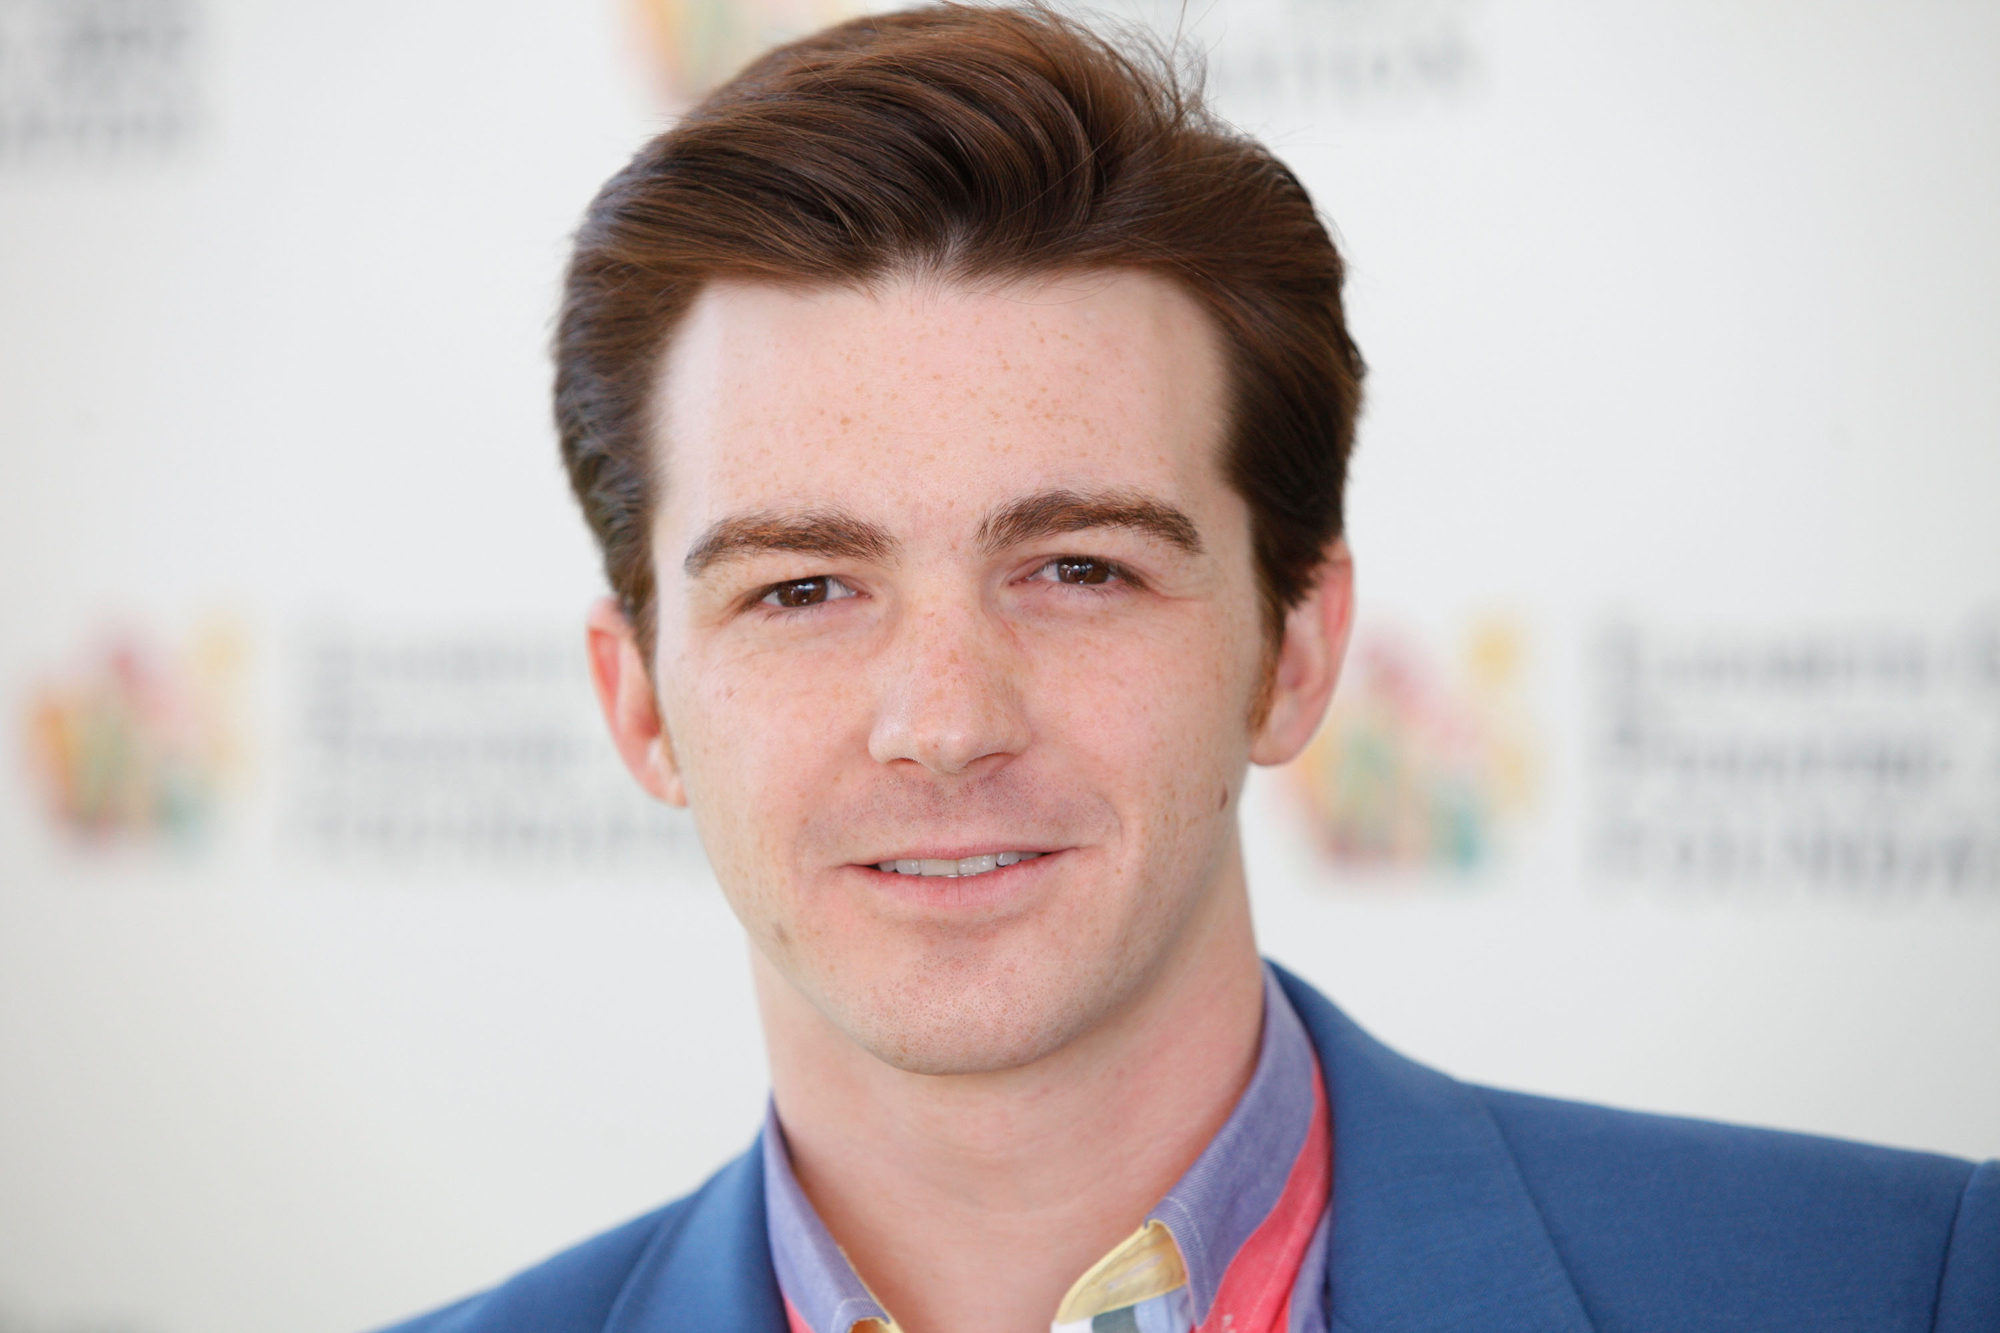 LOS ANGELES, CA - JUNE 03: Actor/musician Drake Bell attends the 23rd Annual Time for Heroes Celebrity Picnic to benefit the Elizabeth Glaser Pediatric AIDS Foundation at Wadsworth Theater on June 3, 2012 in Los Angeles, California. (Photo by Imeh Akpanudosen/Getty Images)